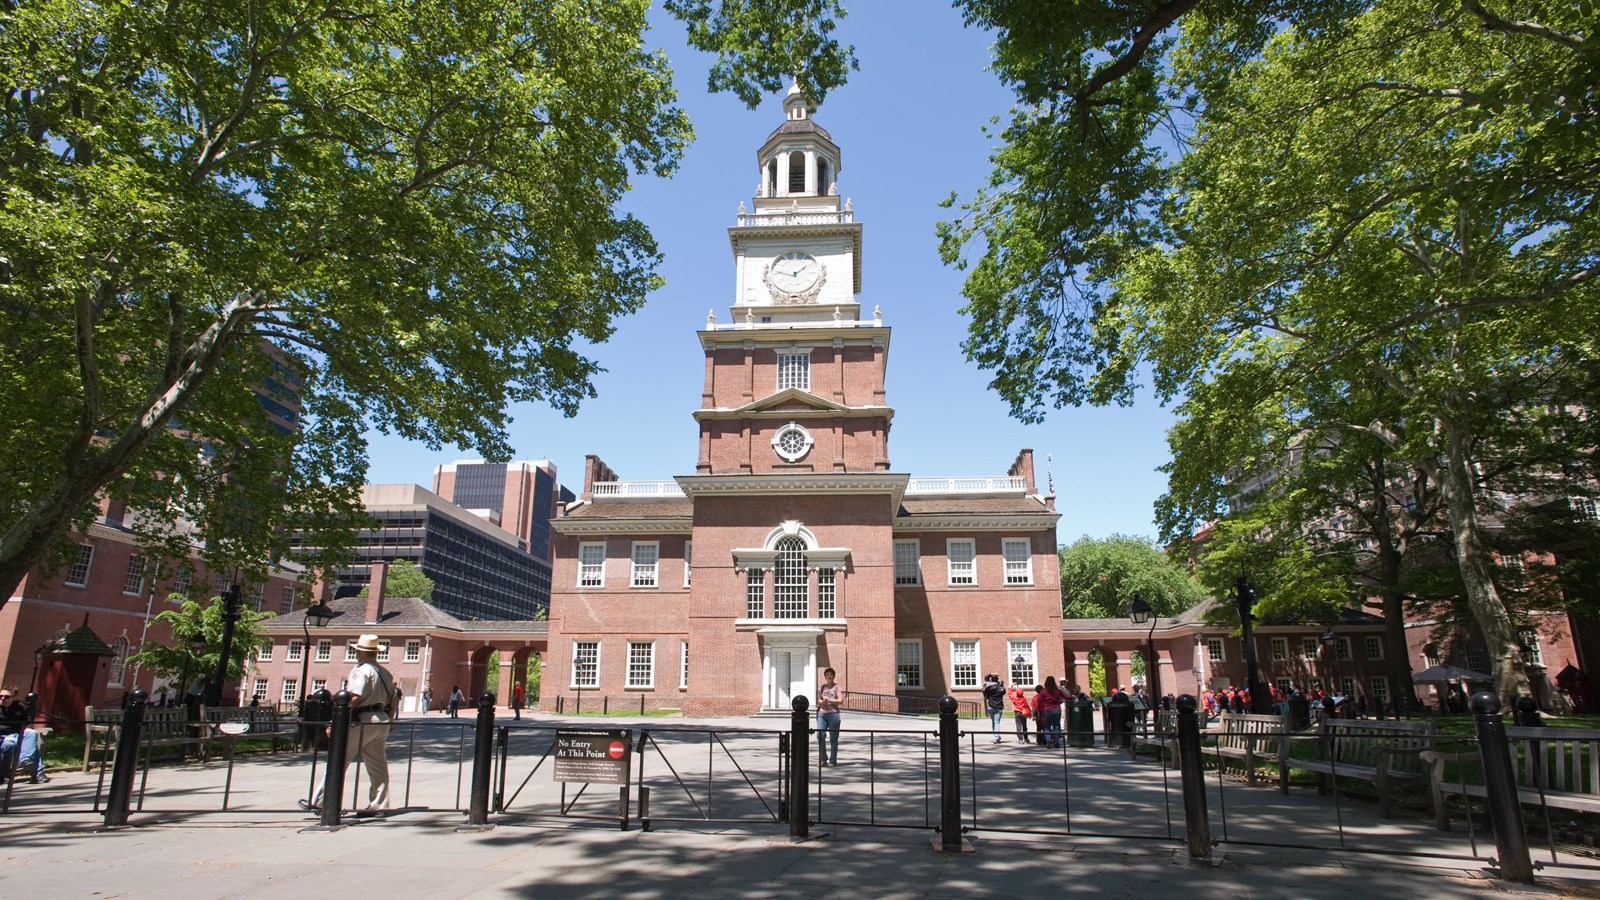 Exterior view of south facade of Independence Hall, with iconic clock tower and steeple.